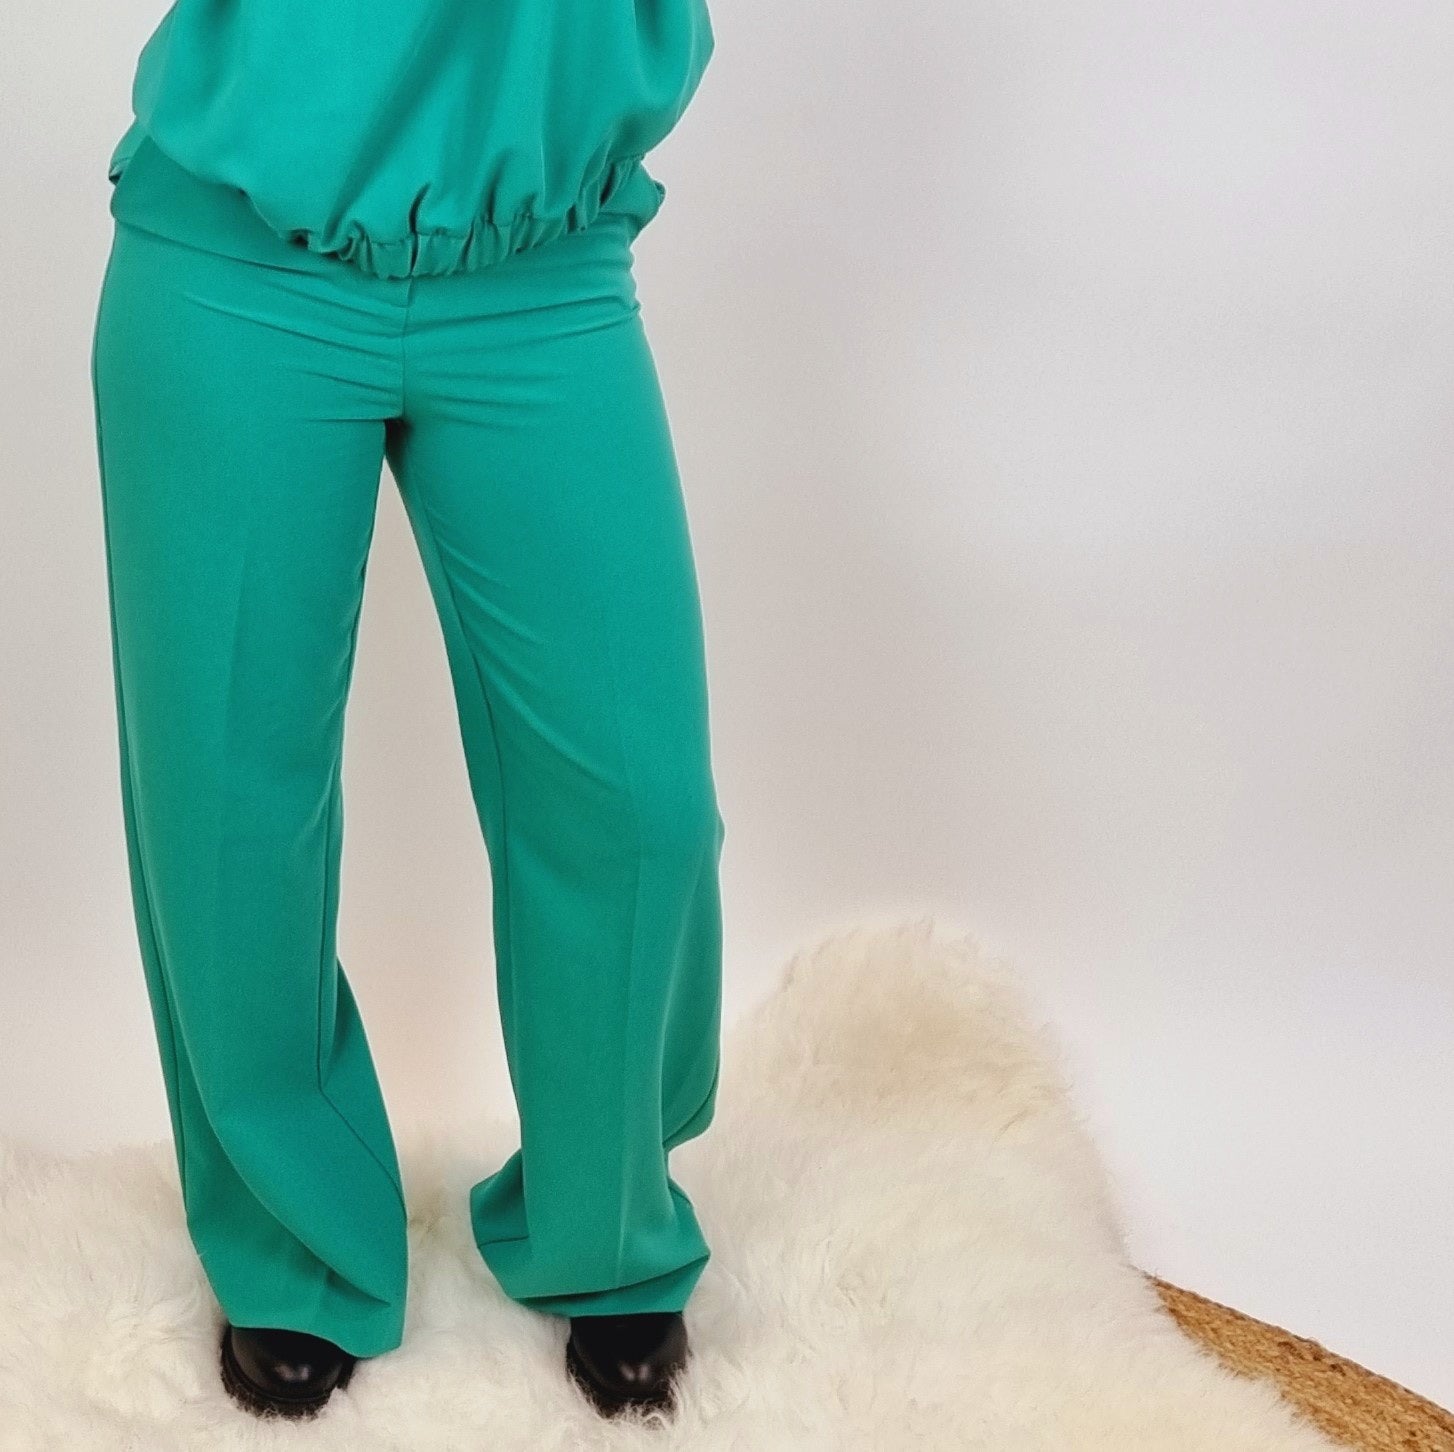 Sit back 'n relax turquoise pants